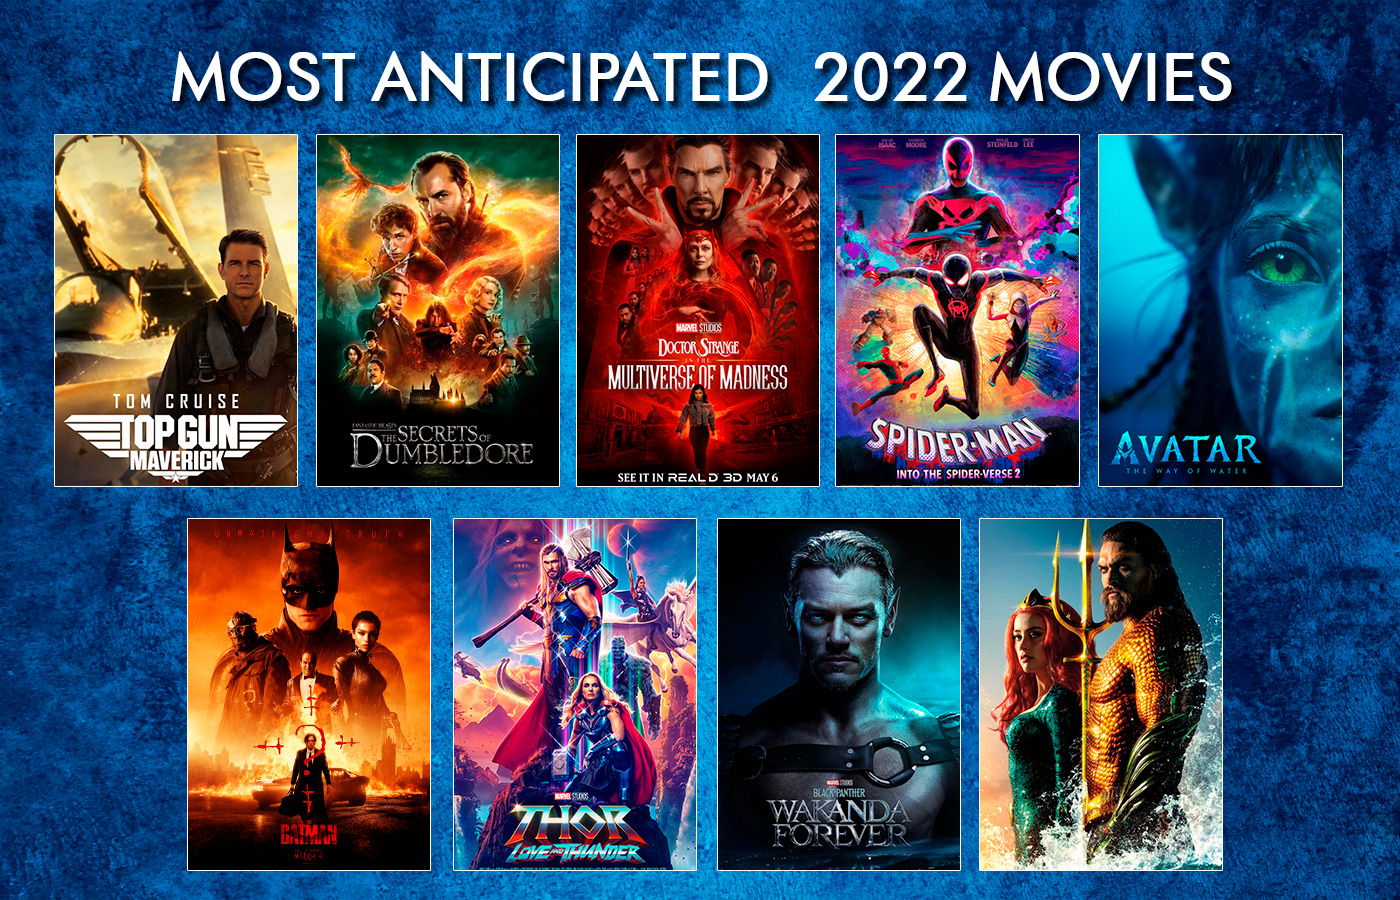  The Most Anticipated Movies of 2022